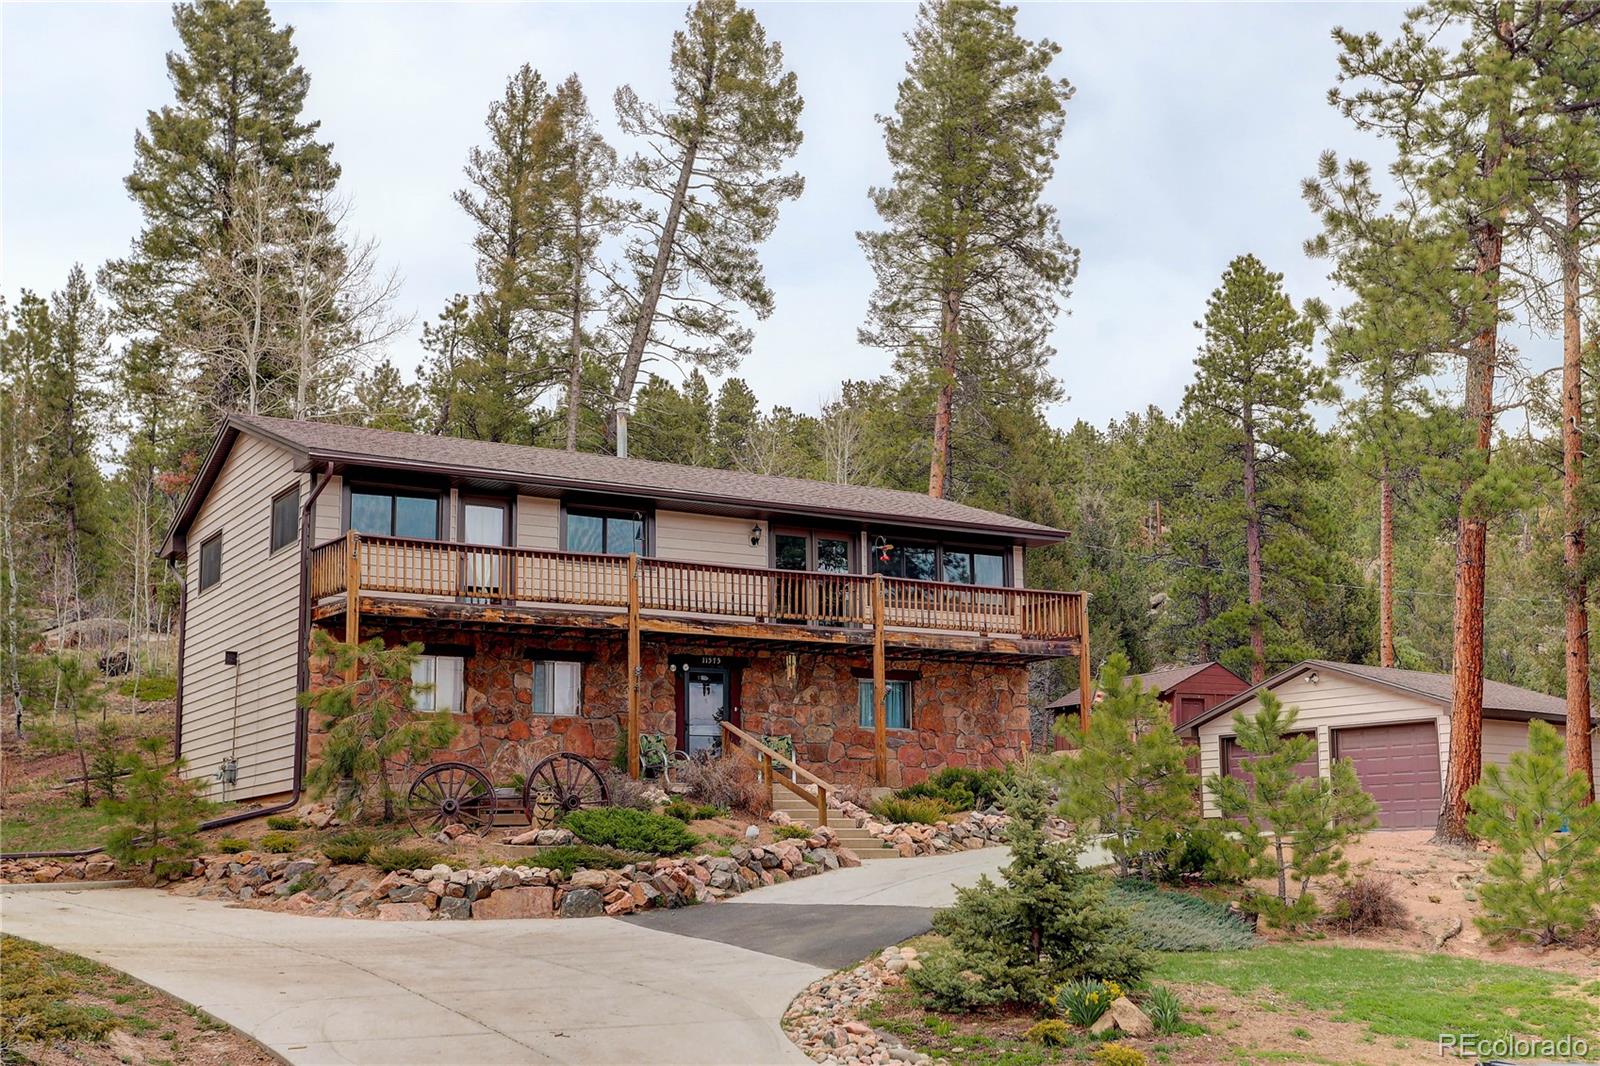 11575 S US Highway 285 Frontage Road, Conifer, CO 80433 - MLS#: 9609044